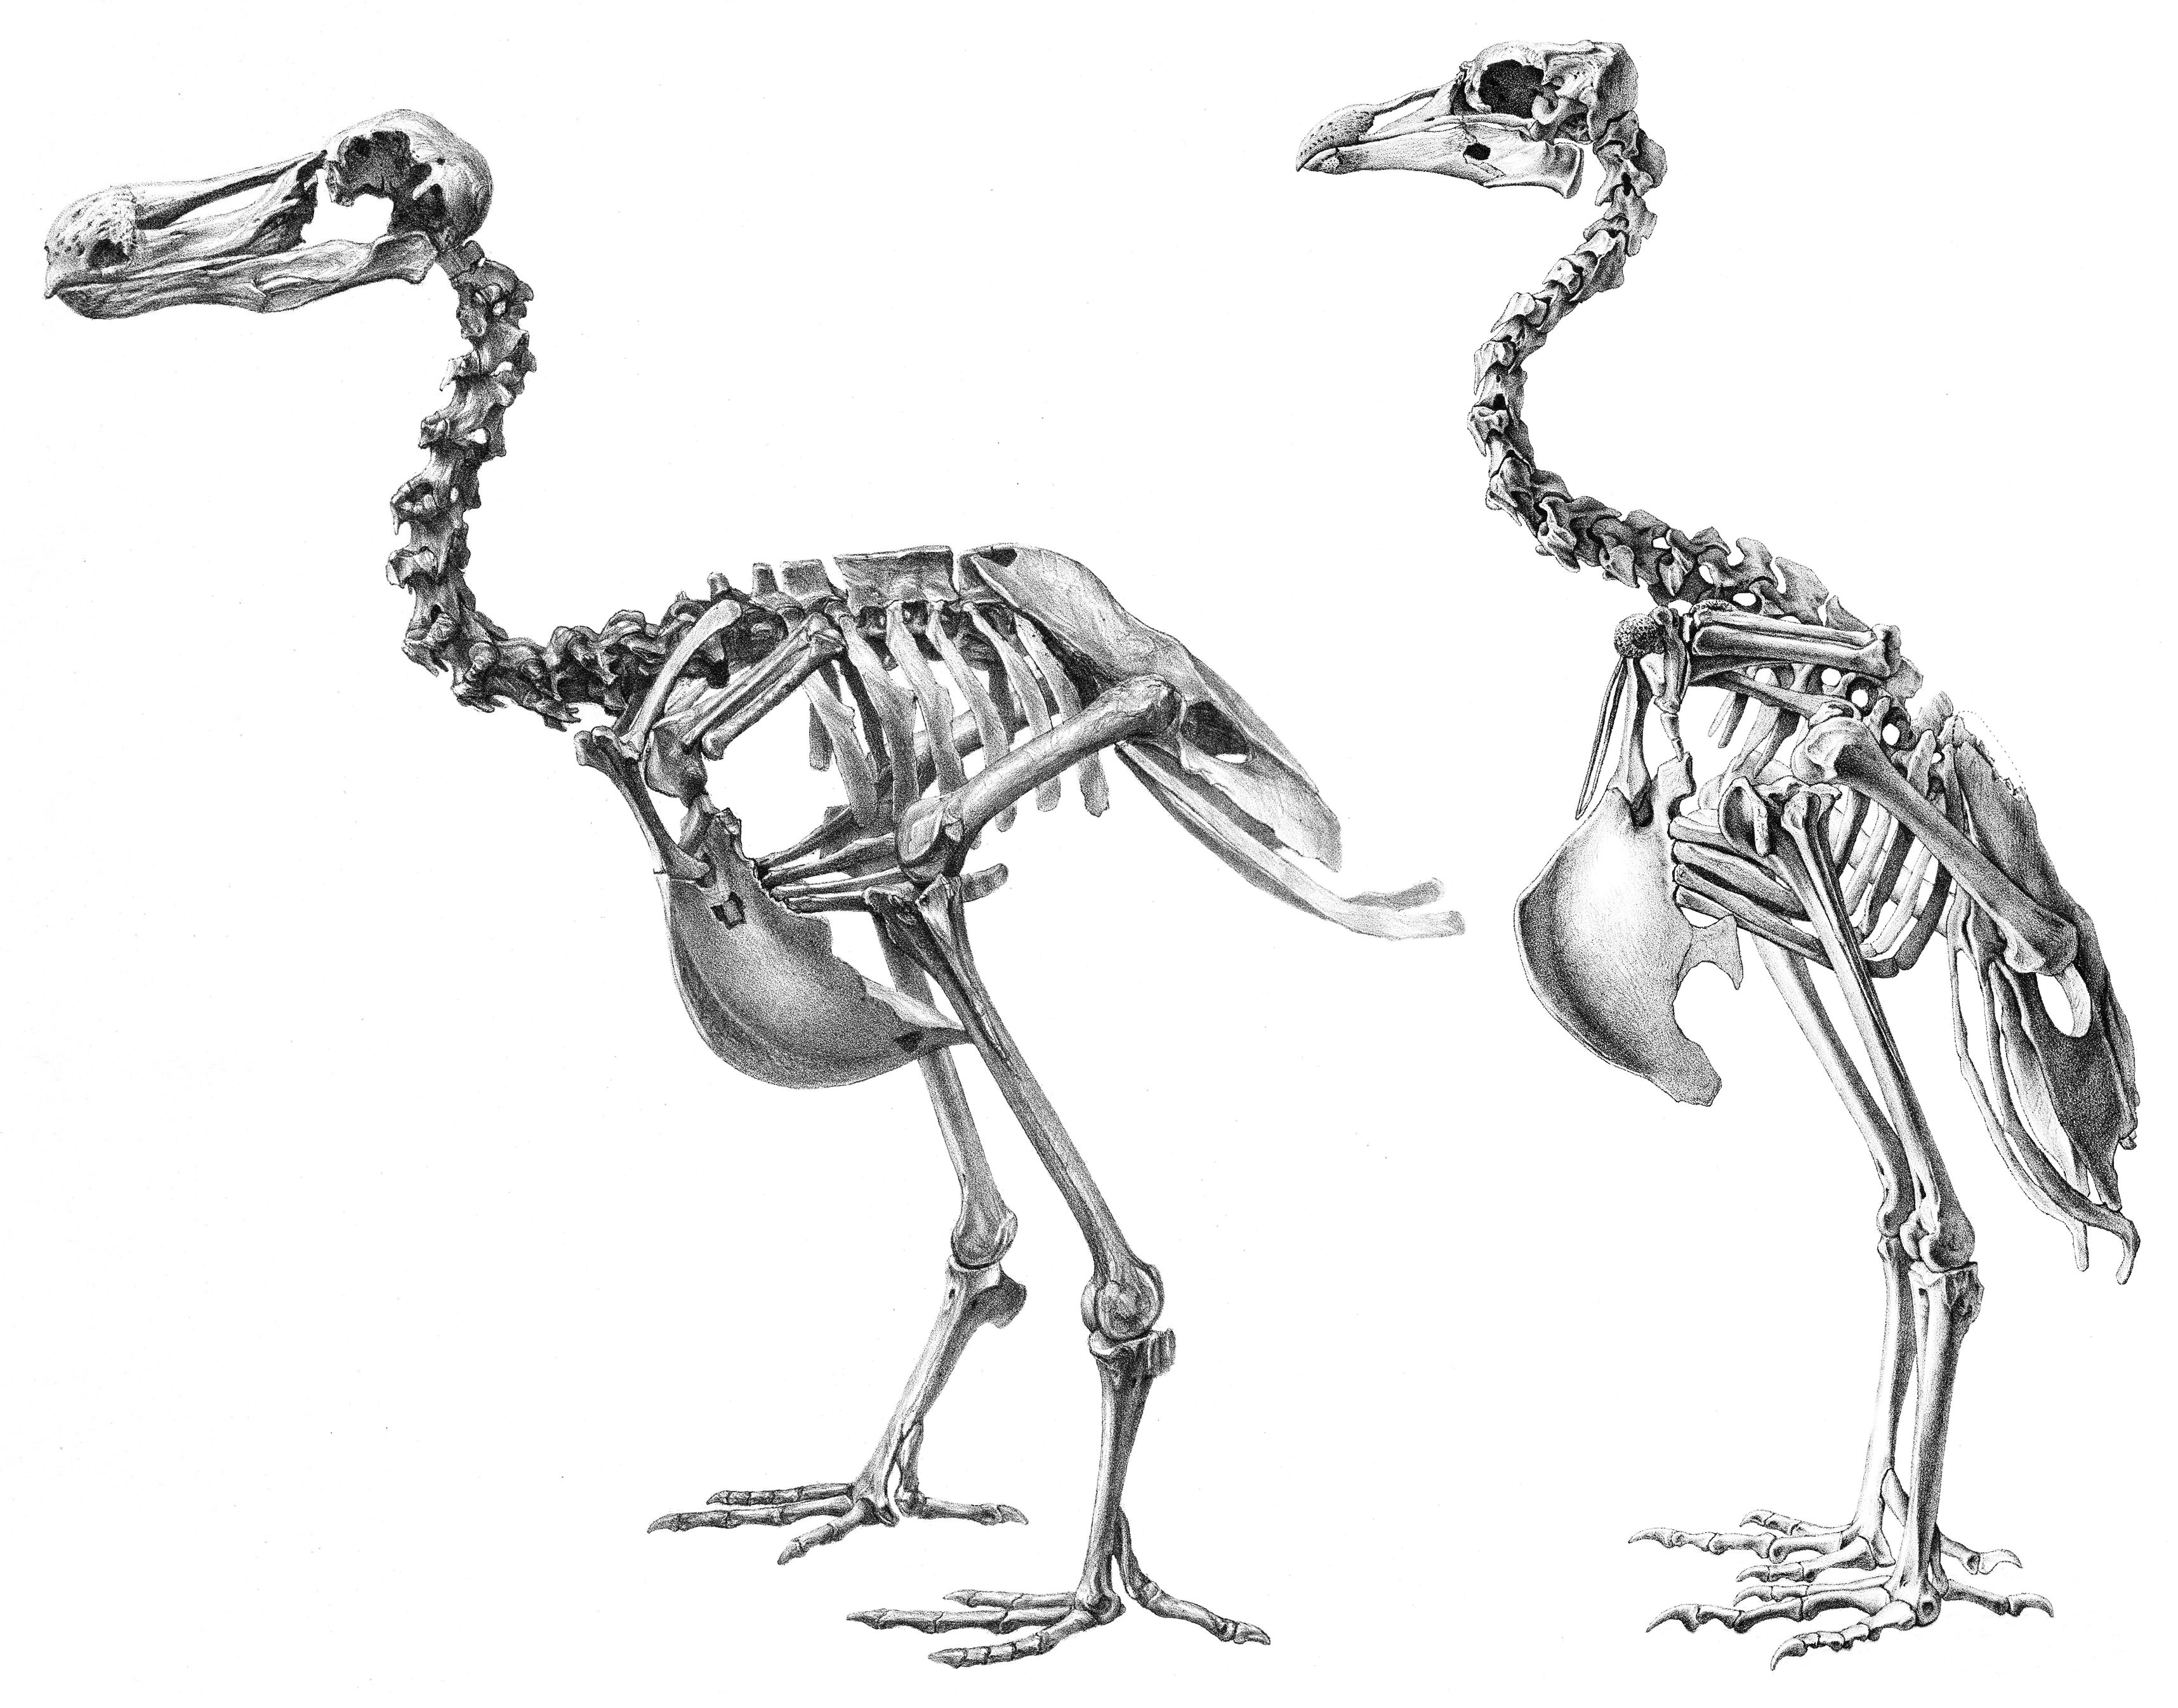 dodo and rodrigues solitaire skeletons compared not to scale